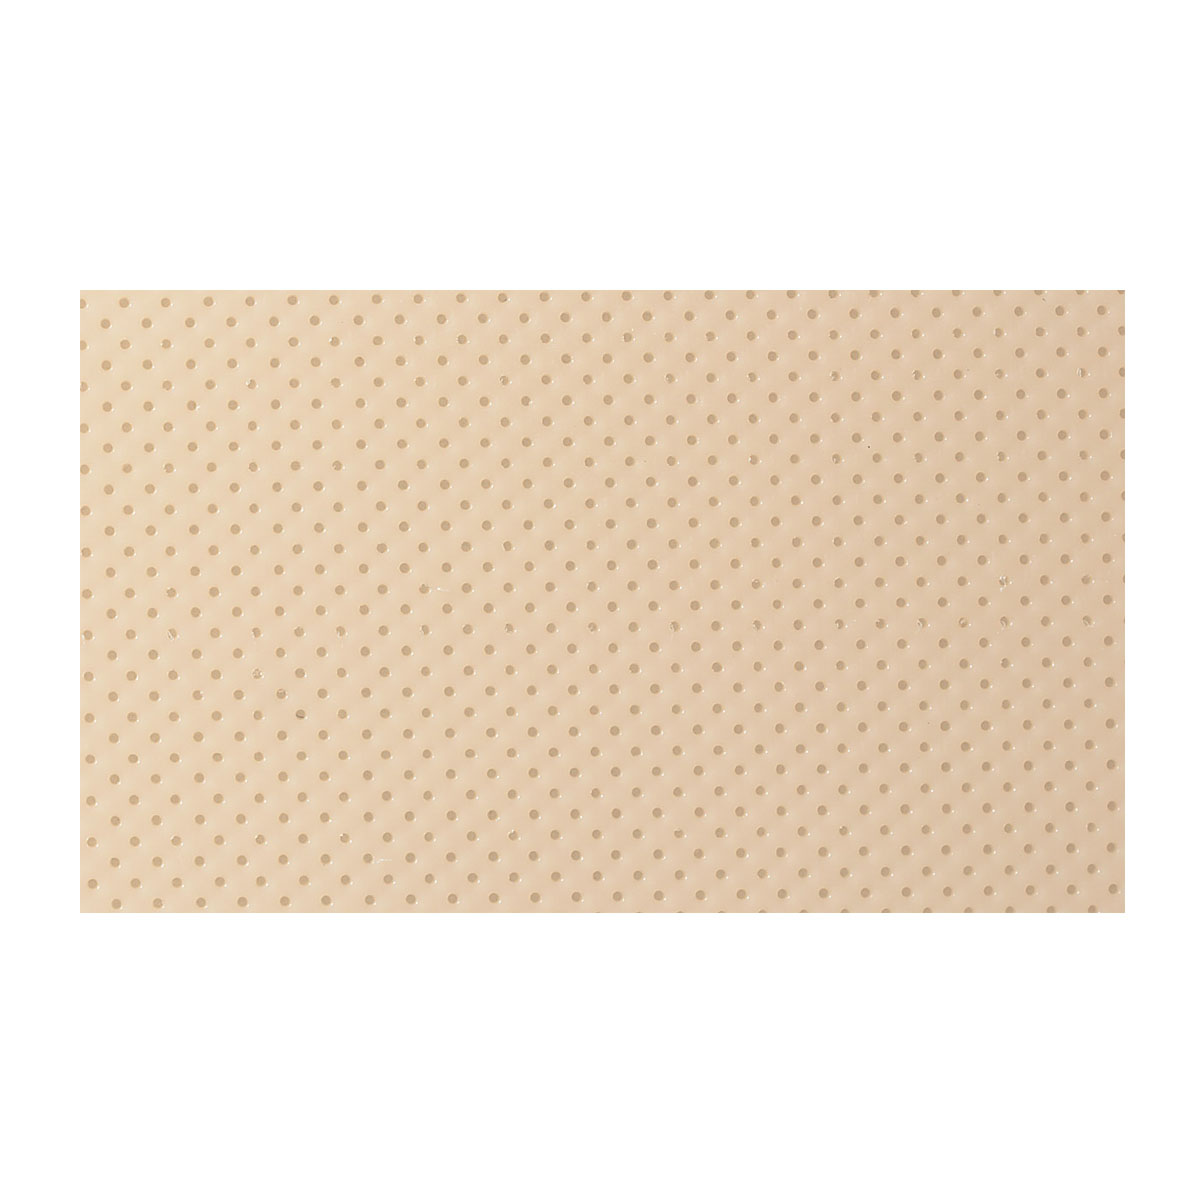 Picture of Orfit 24-5623-1 18 x 24 x 0.08 in. Classic Soft 13 Percent Micro Perforated Splinting Material